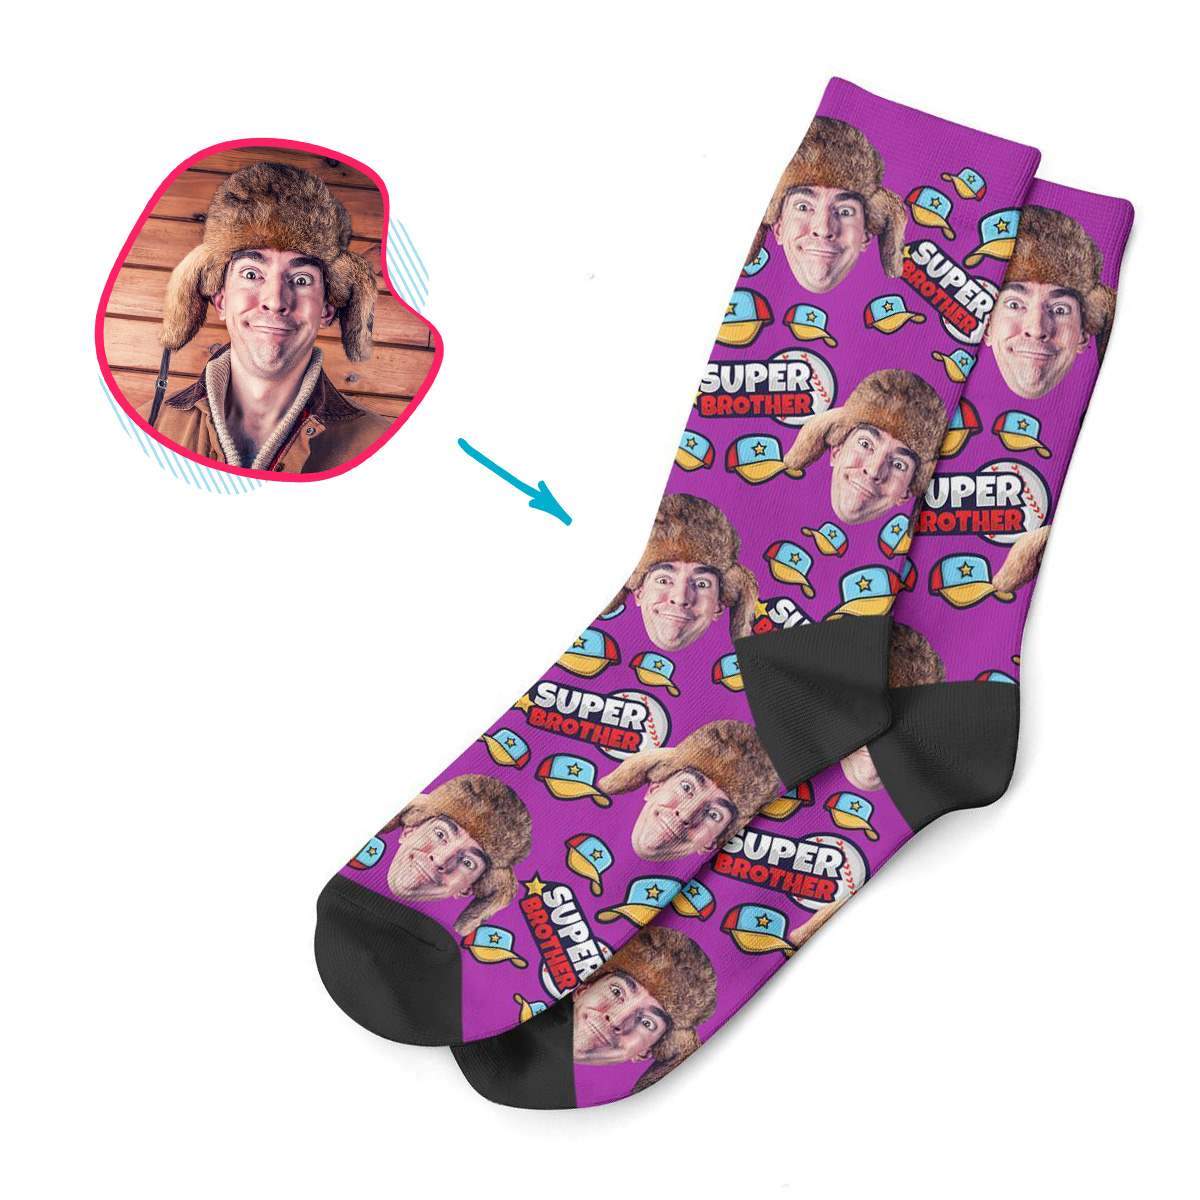 purple Super Brother socks personalized with photo of face printed on them